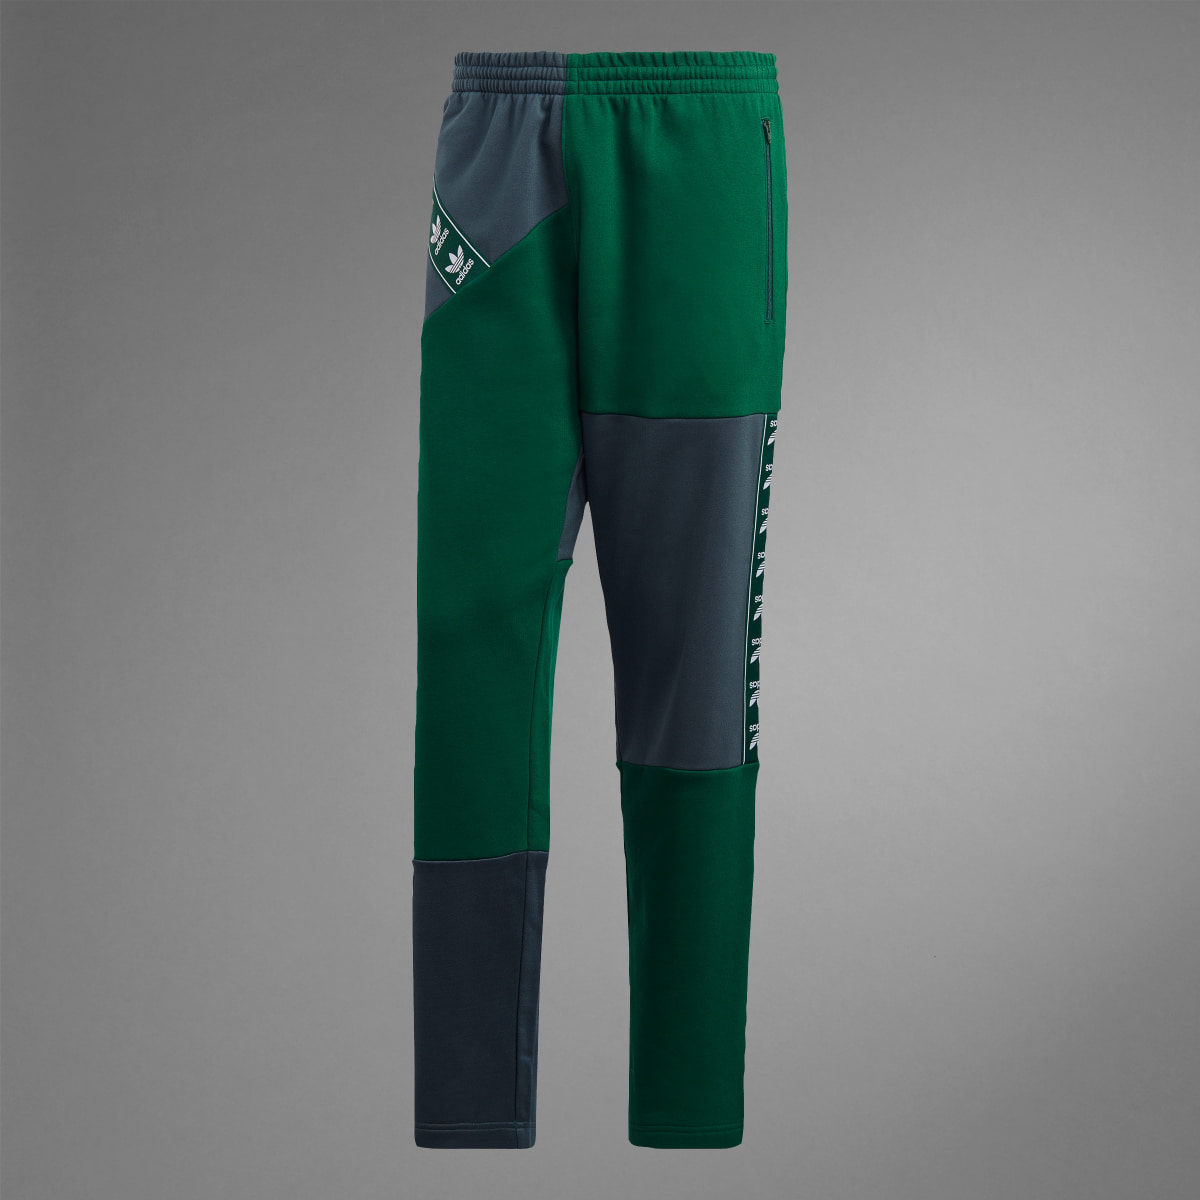 Adidas ADC Patchwork FB Joggers. 10